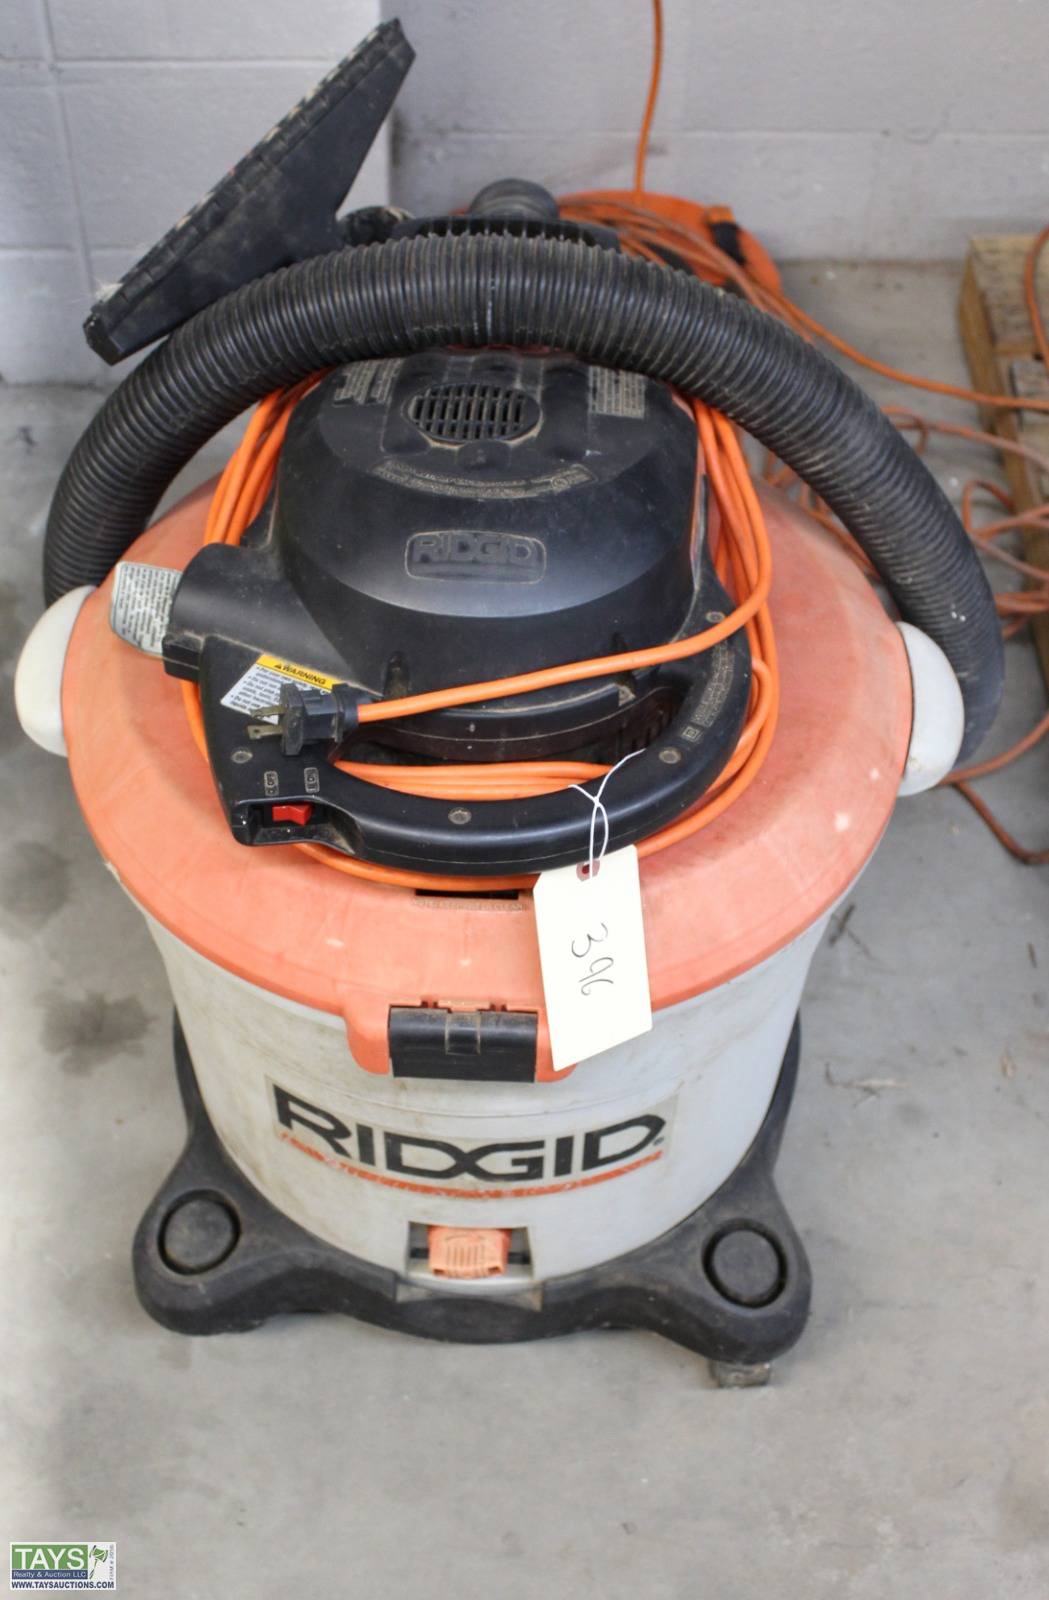 2004 Black Friday special Ridgid Shop Vac. It's been thru hell and back  with commerical construction and projects at home. It still sucks! :  r/BuyItForLife